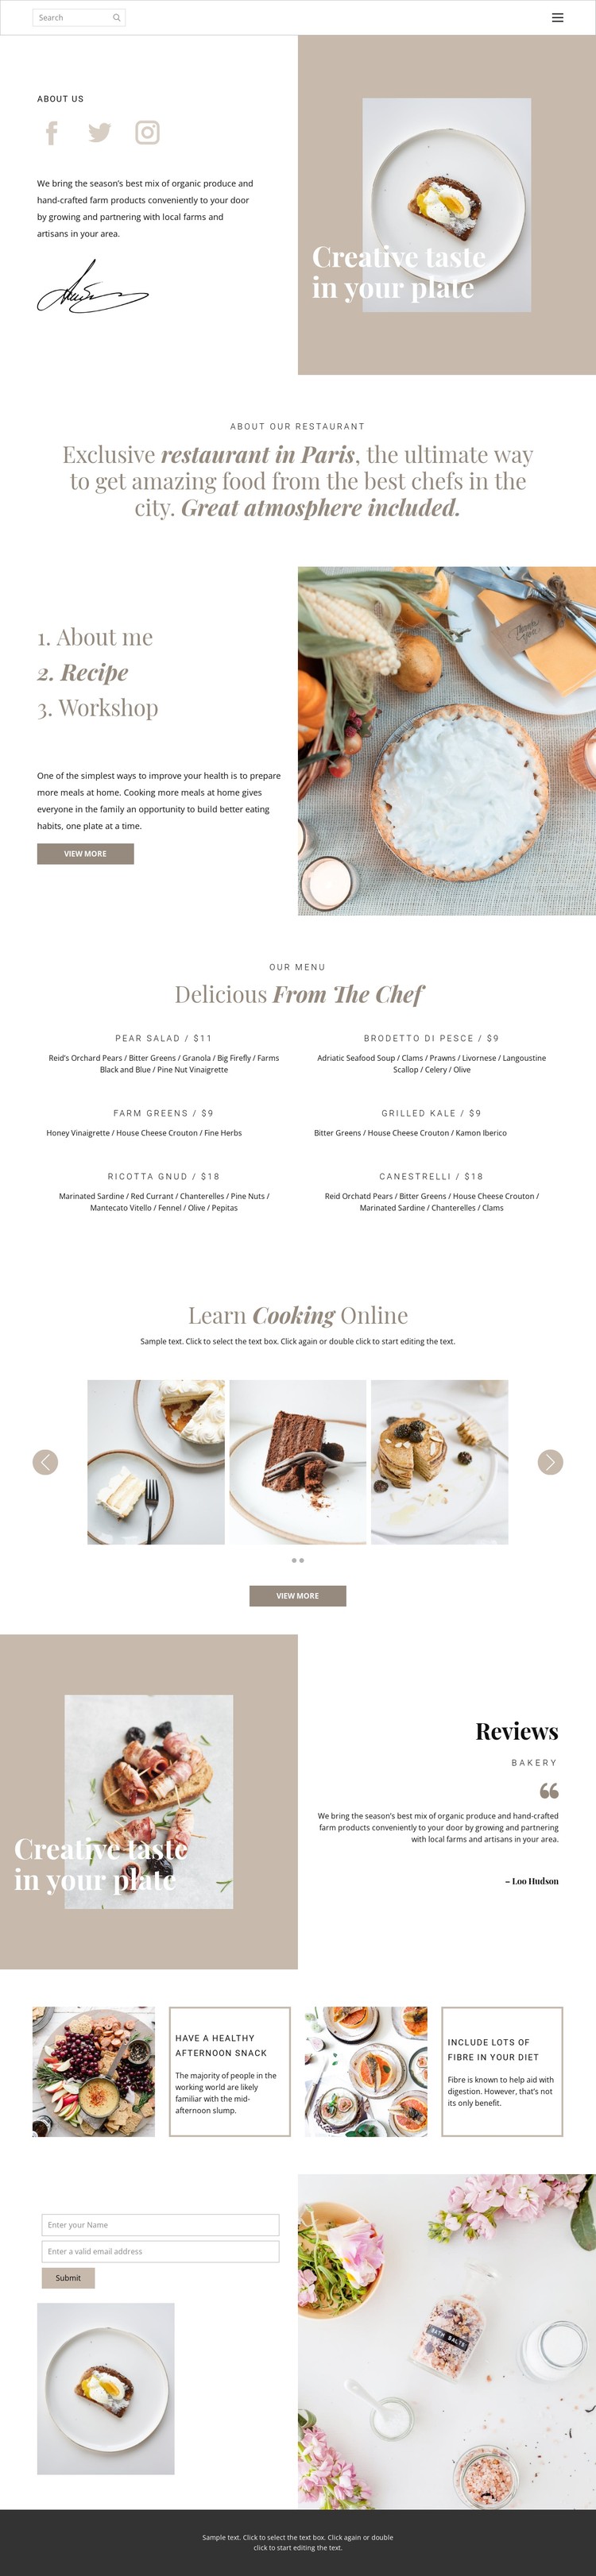 Creative taste in plate CSS Template